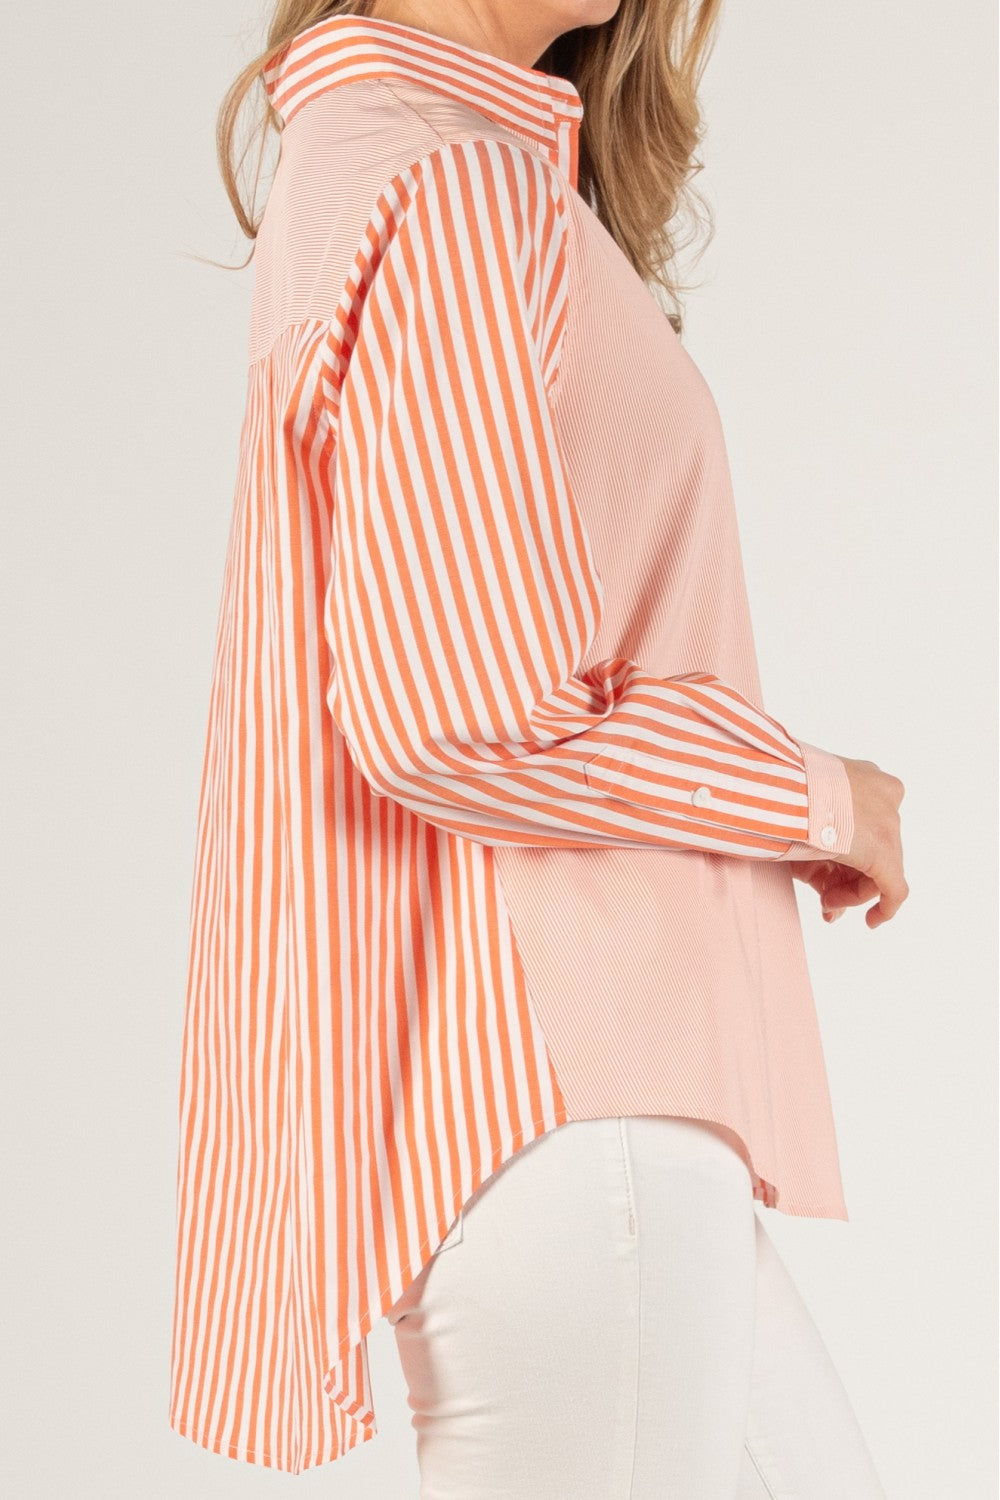 Contrast Stripe Button Up Top